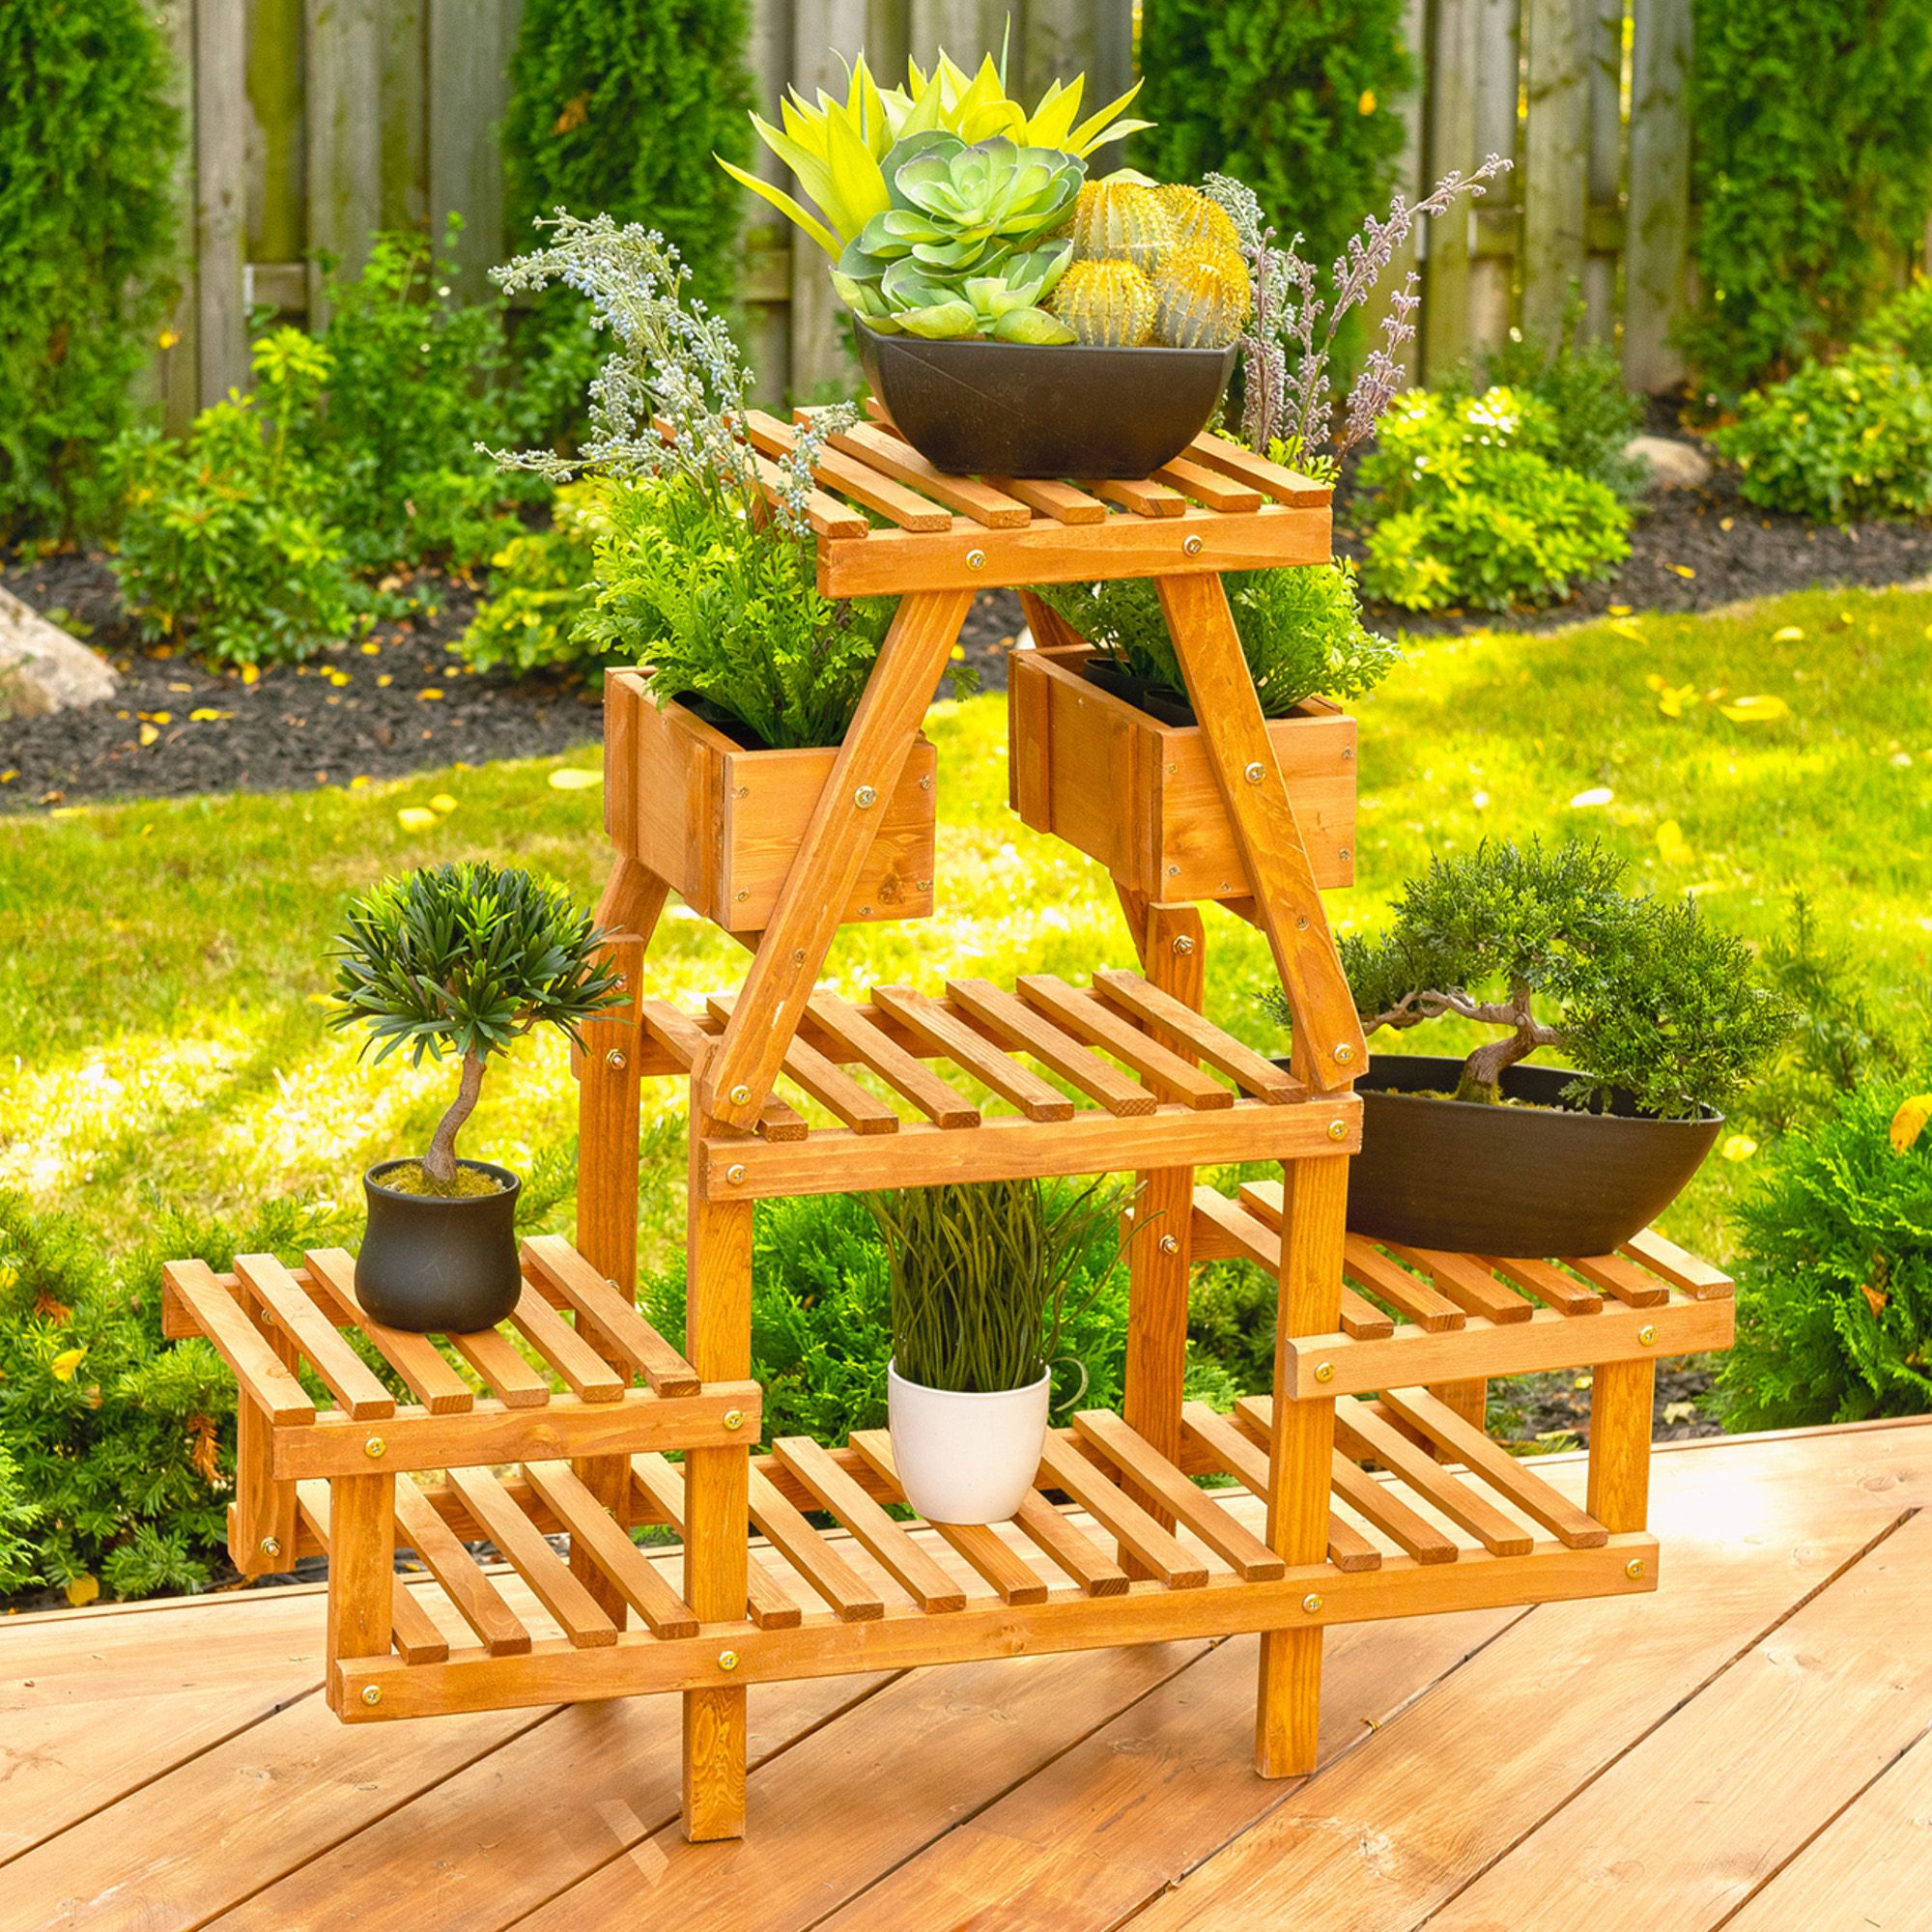 Leisure Season Ltd – 4 Tier Plant Stand With Pot Holders In Well Known 4 Tier Plant Stands (View 14 of 15)